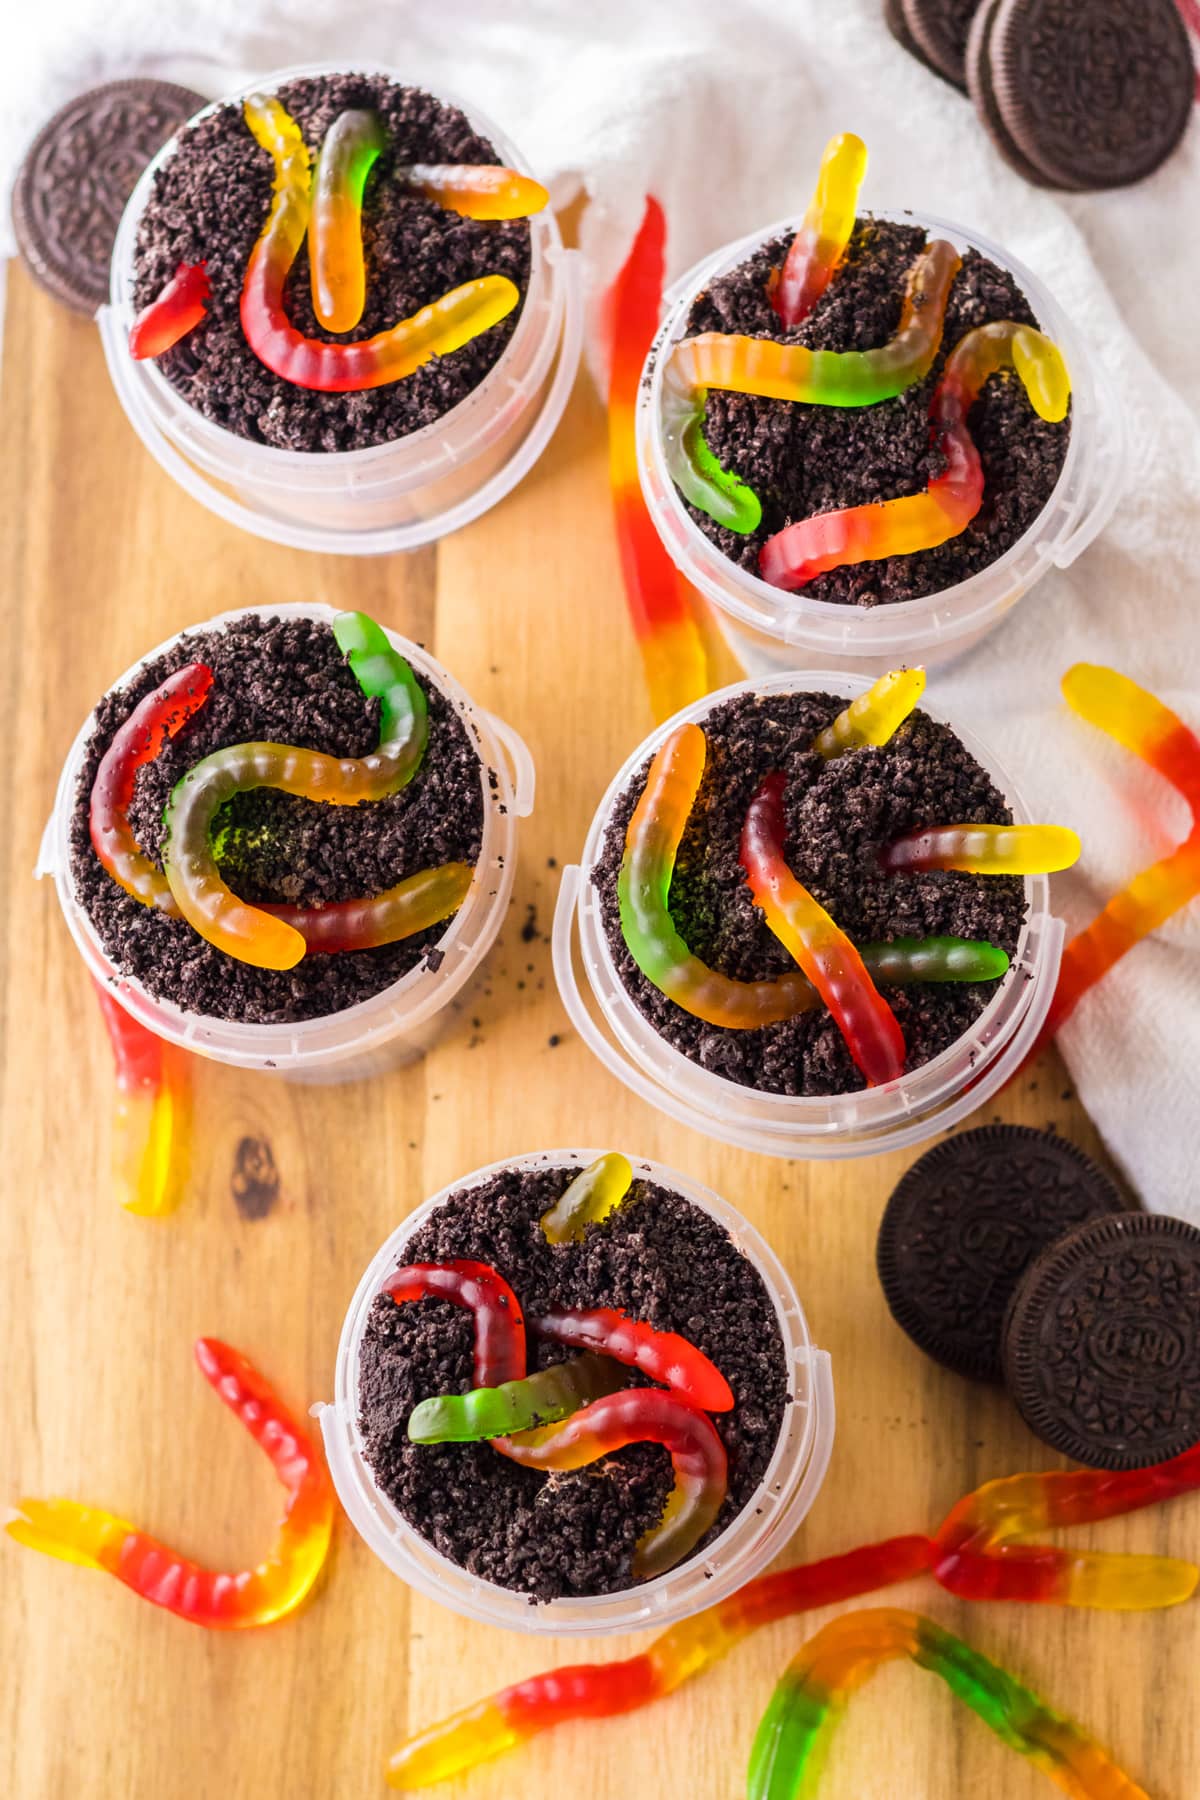 gummy worms on top of chocolate cookie crumbs and dirt pudding in plastic buckets